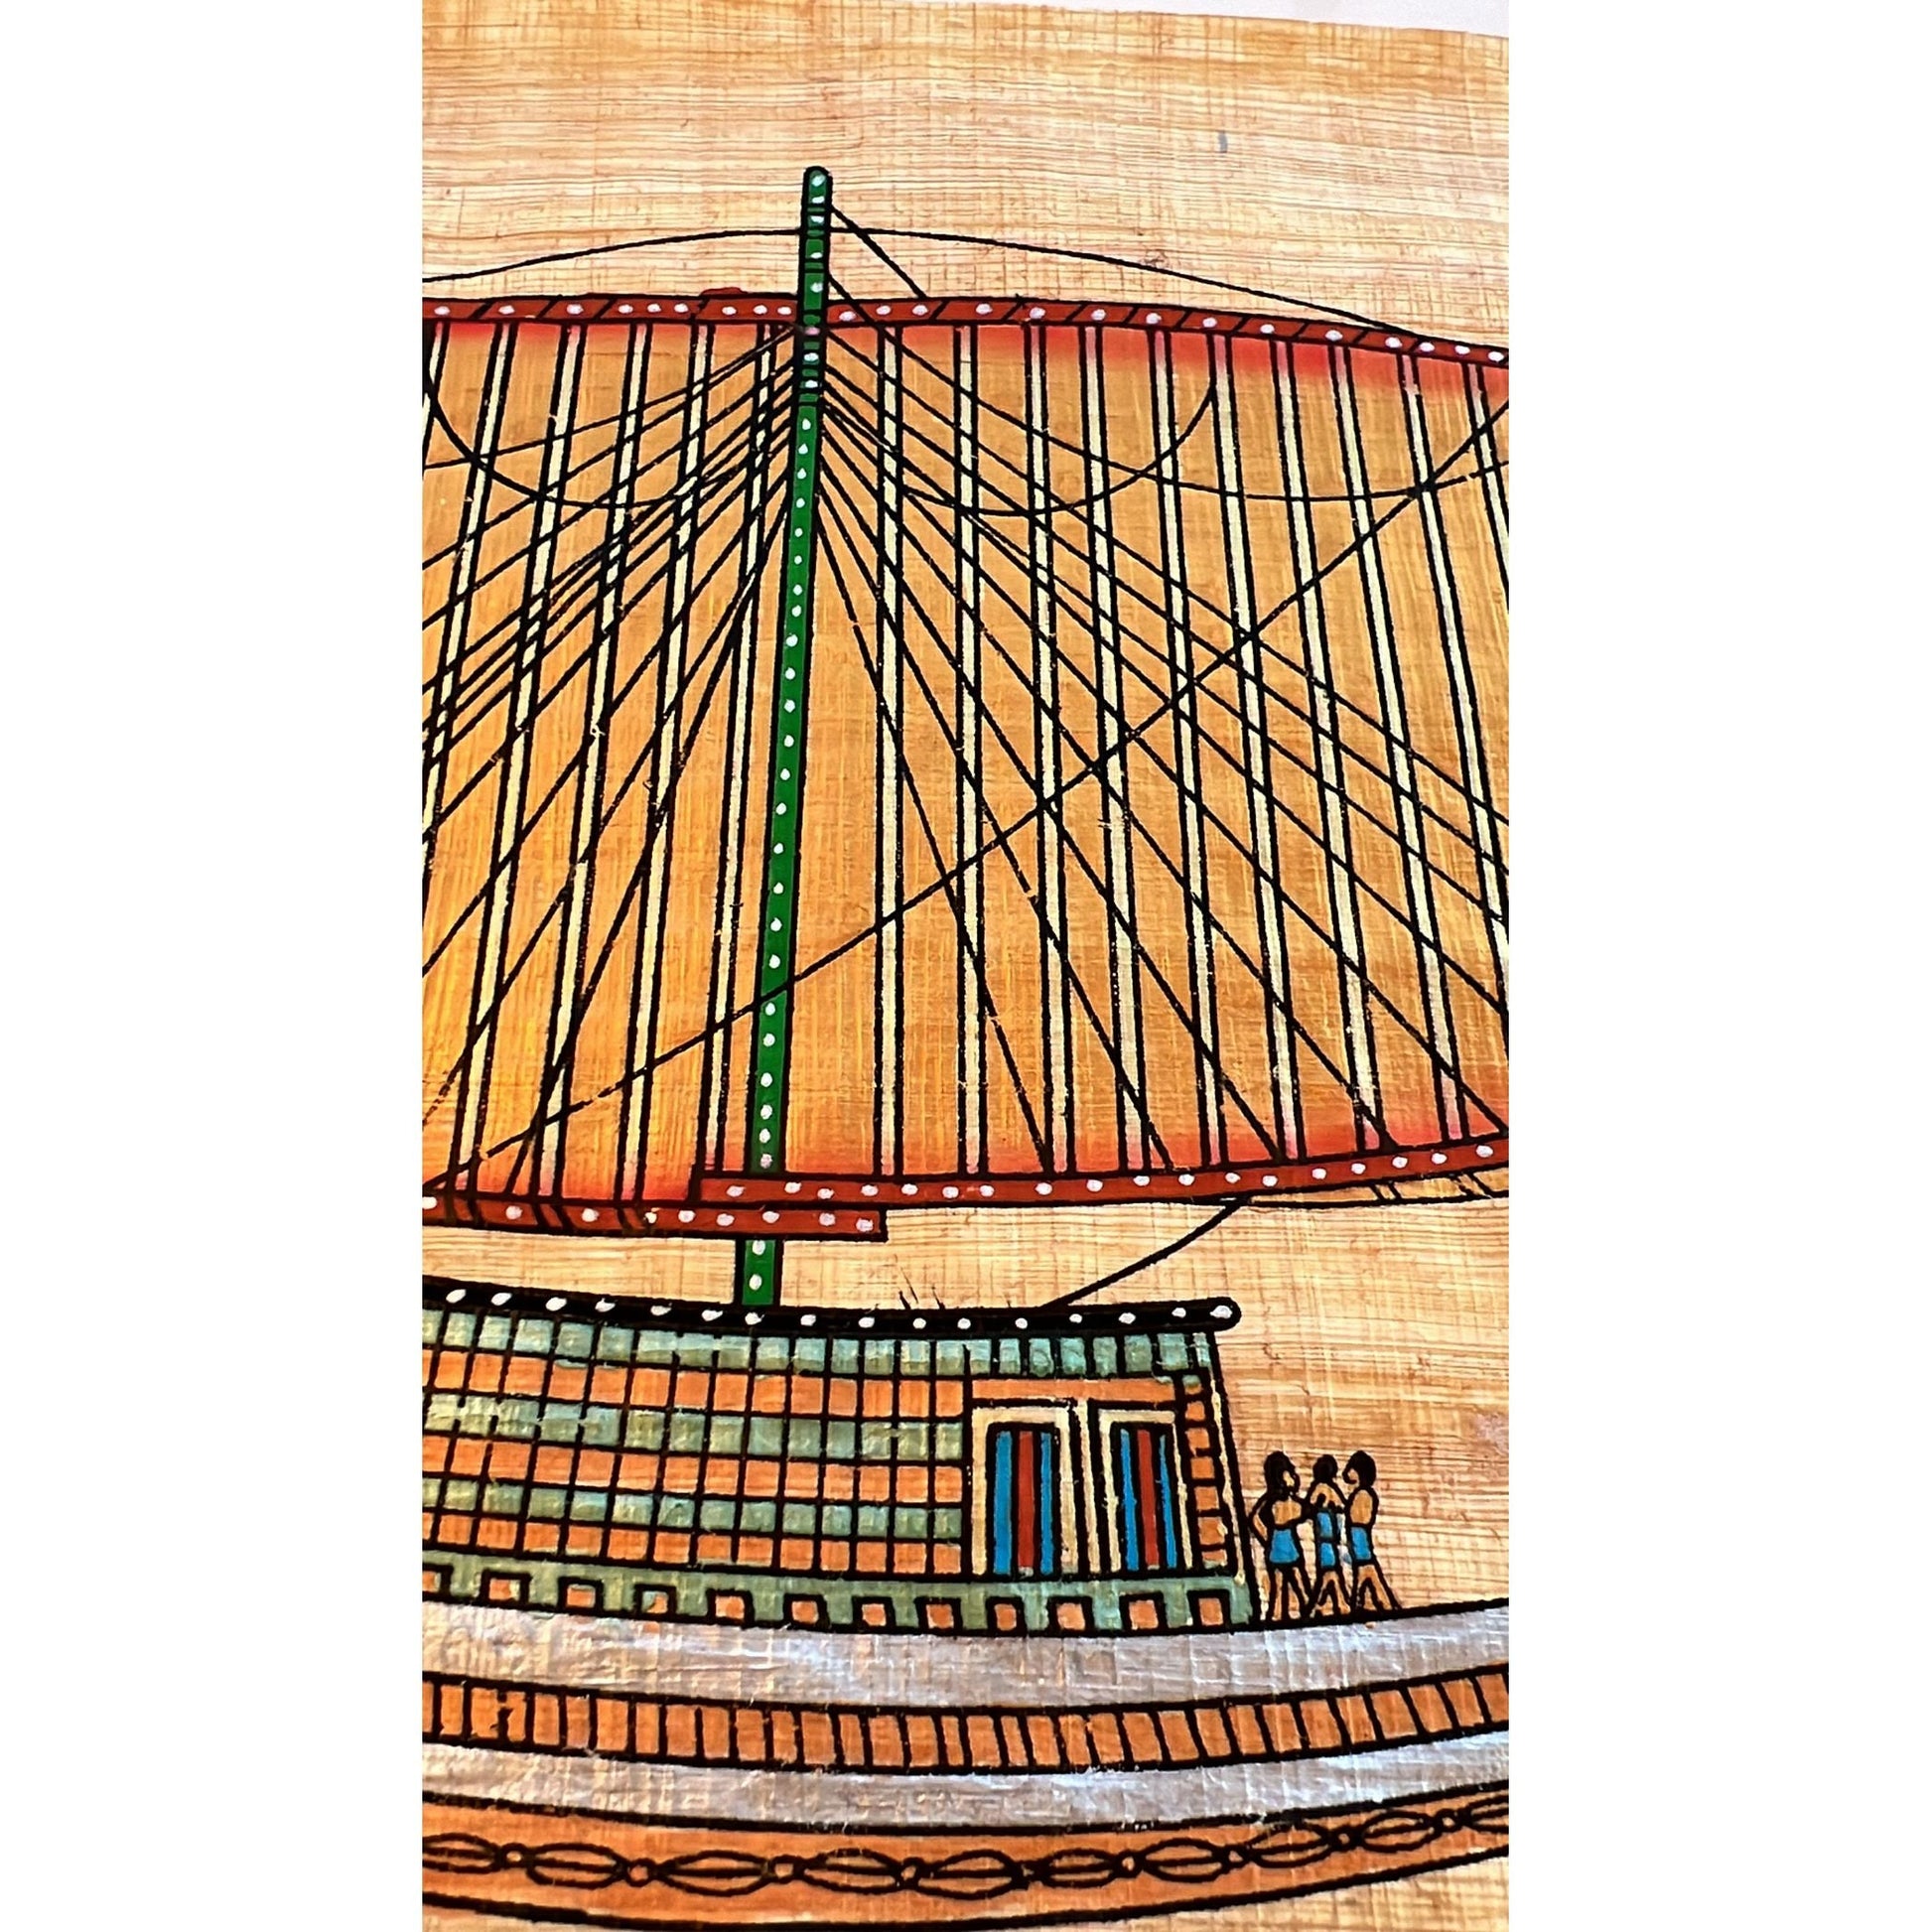 Sailing Boat of Ancient Egyptian, Egypt Papyrus Art Wall Decor